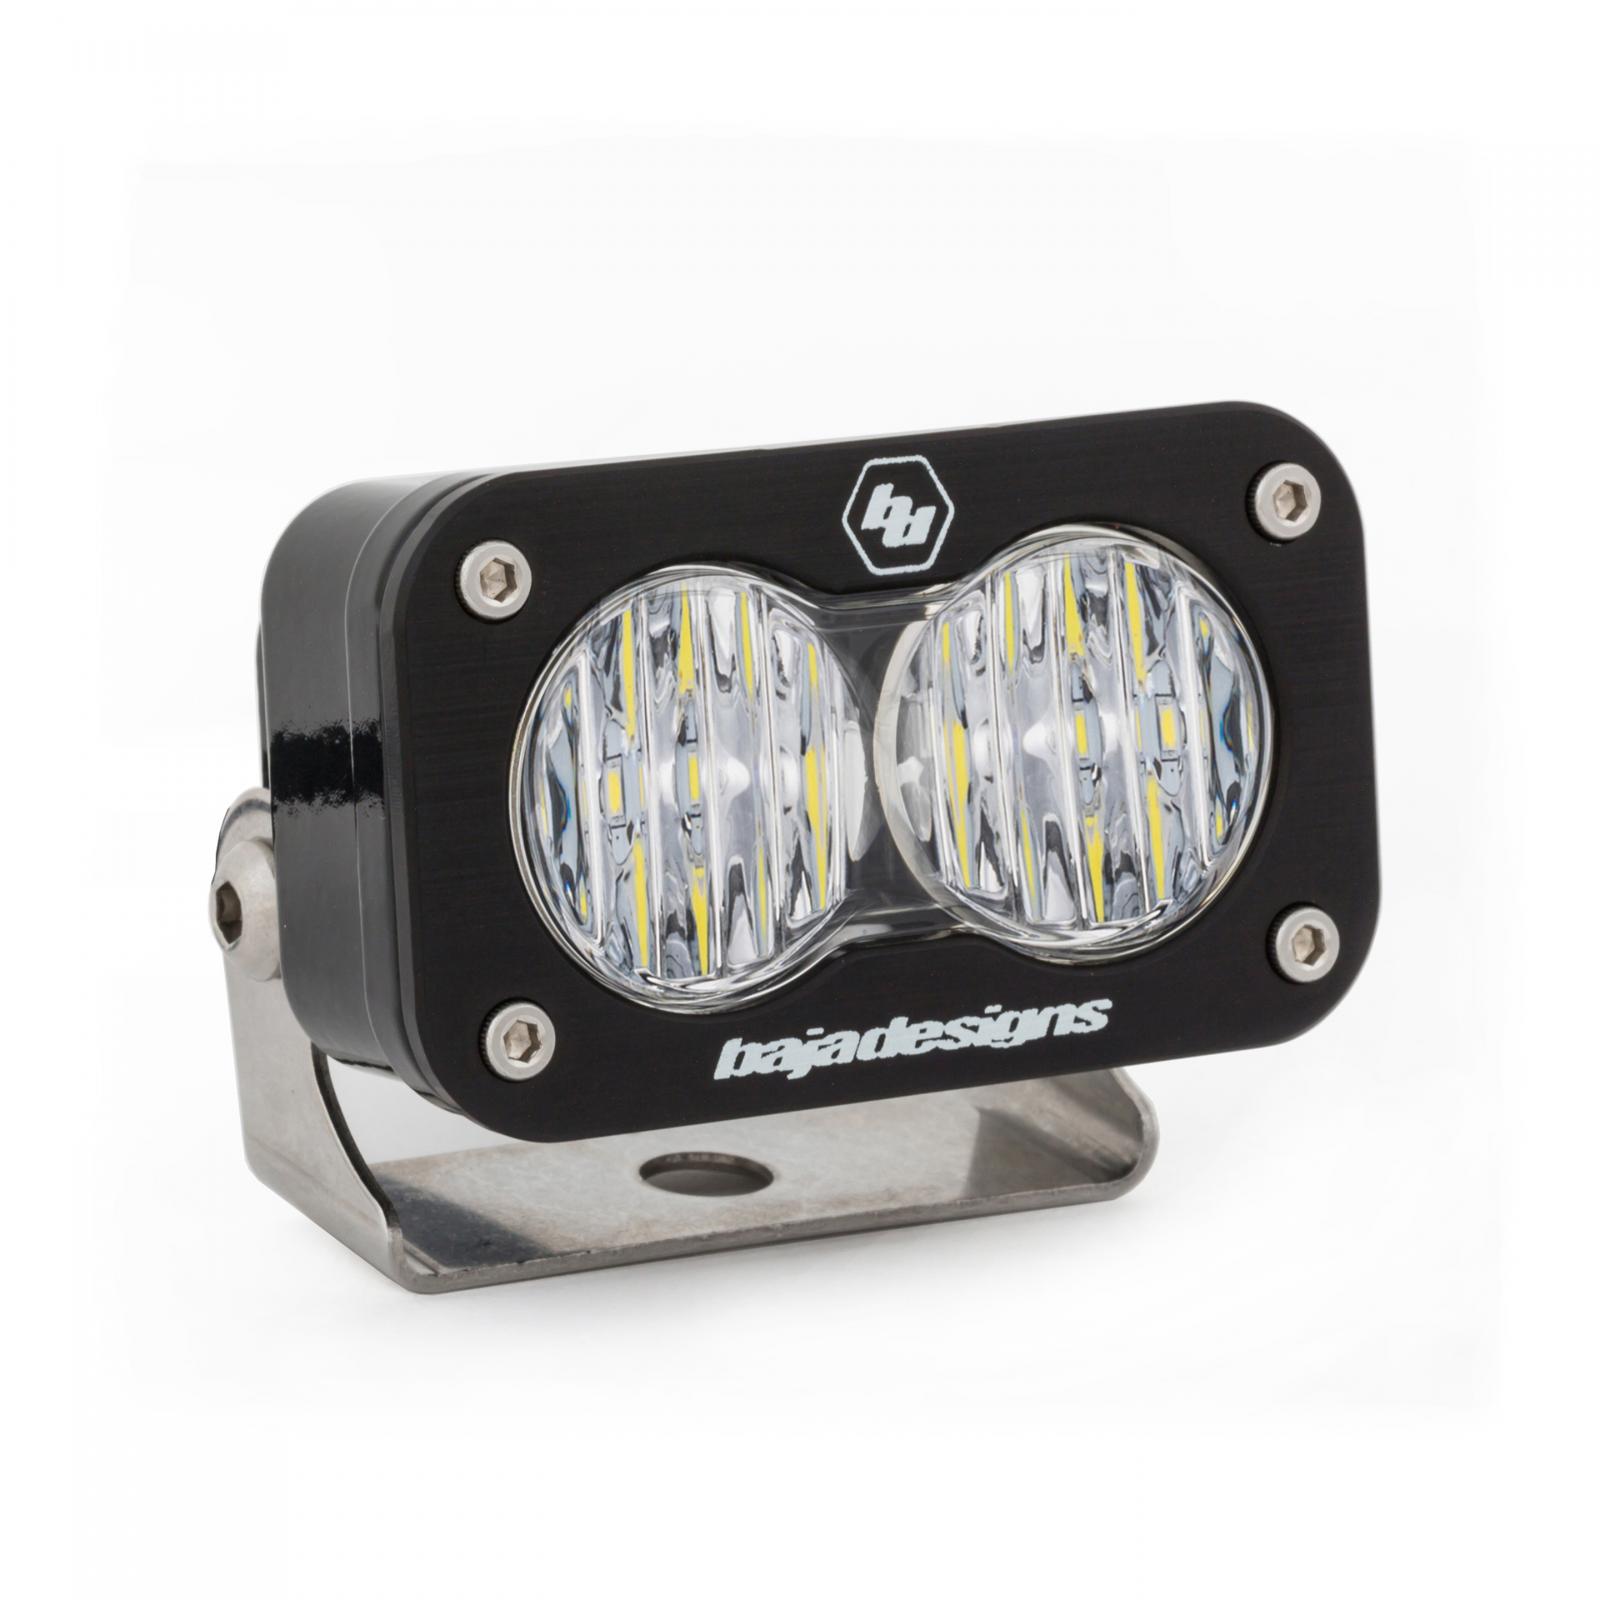 LED Work Light Clear Lens Wide Driving Pattern S2 Pro Baja Designs - Click Image to Close